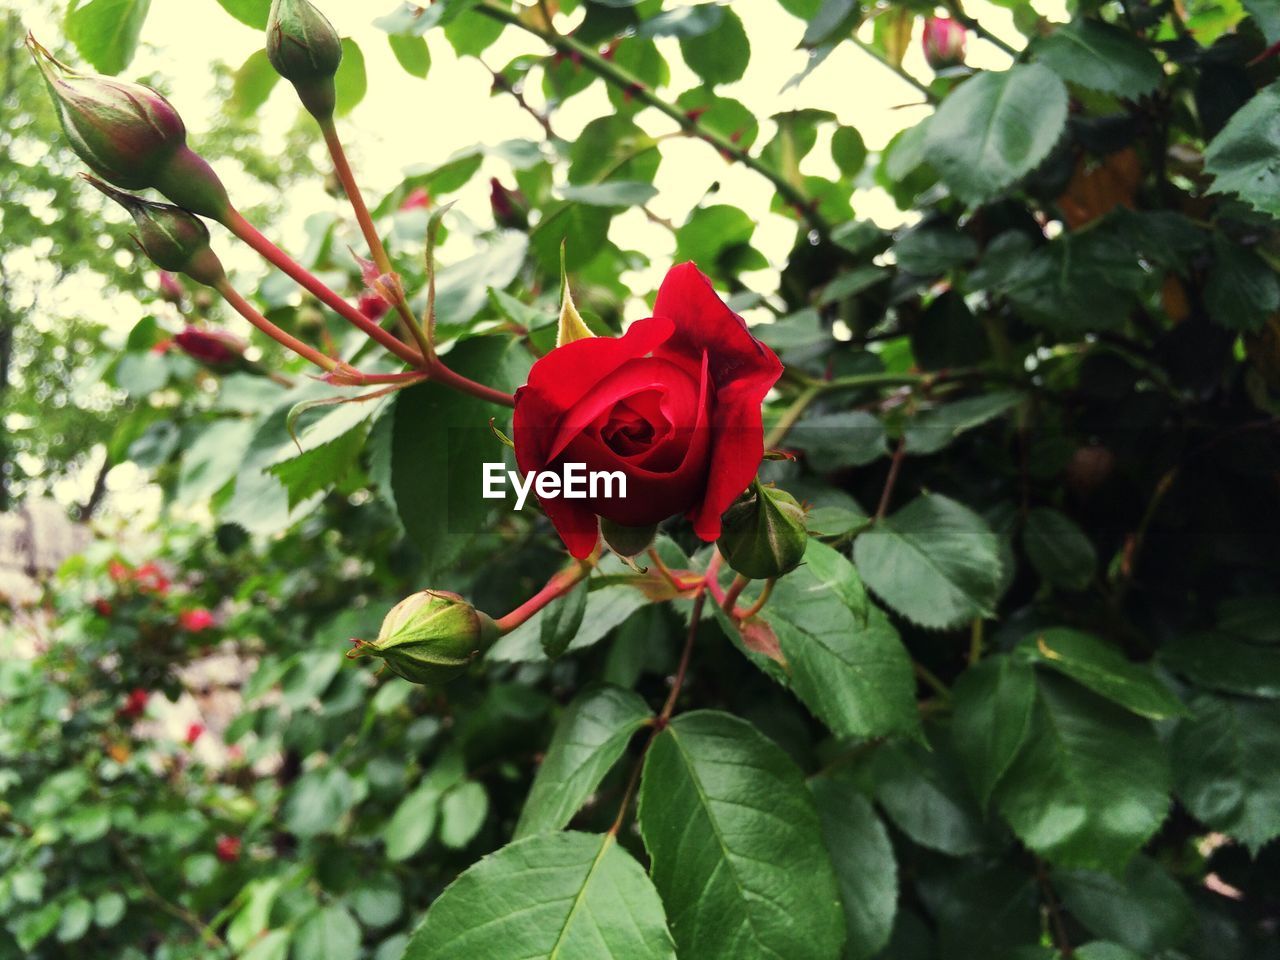 Red rose growing on tree